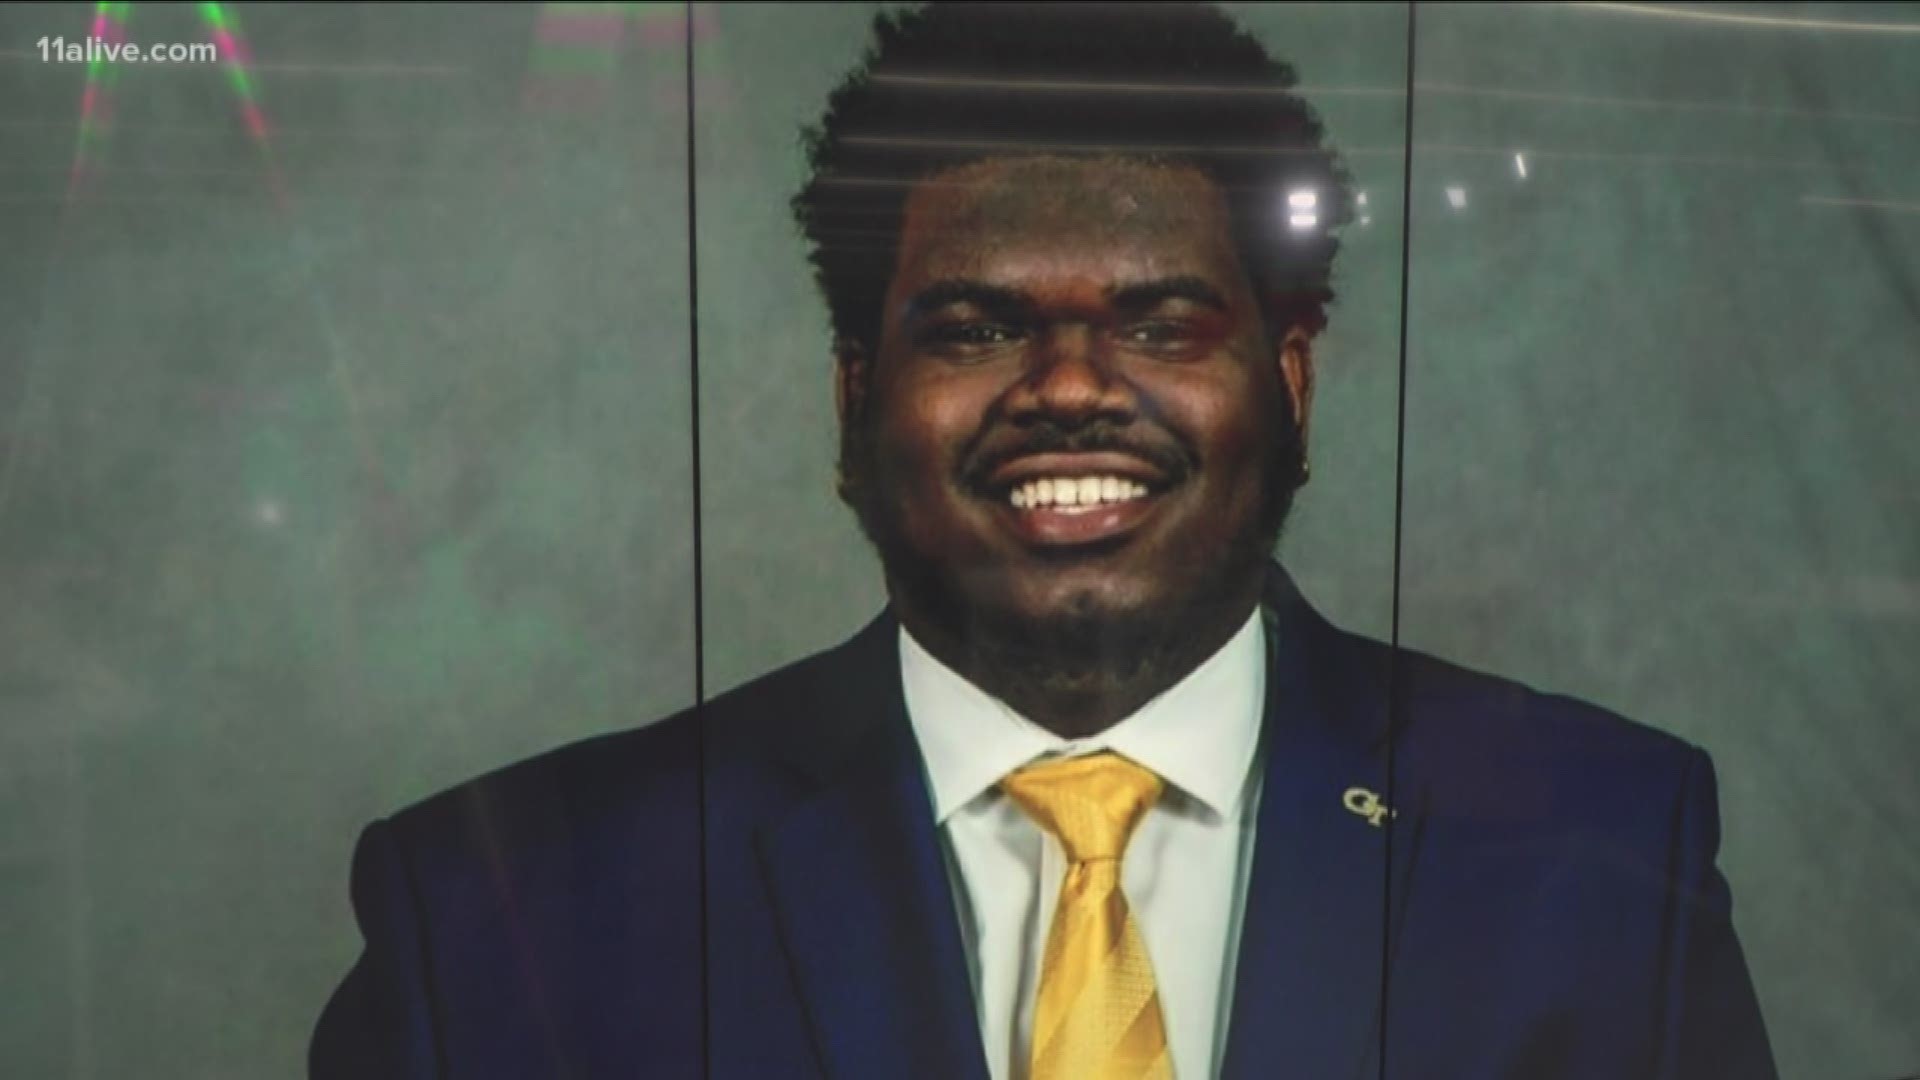 Brandon Adams was a business administration major and rising senior football student-athlete. Off the field, he spent the summer of 2018 interning for the world-renowned Georgia Tech Research Institute.